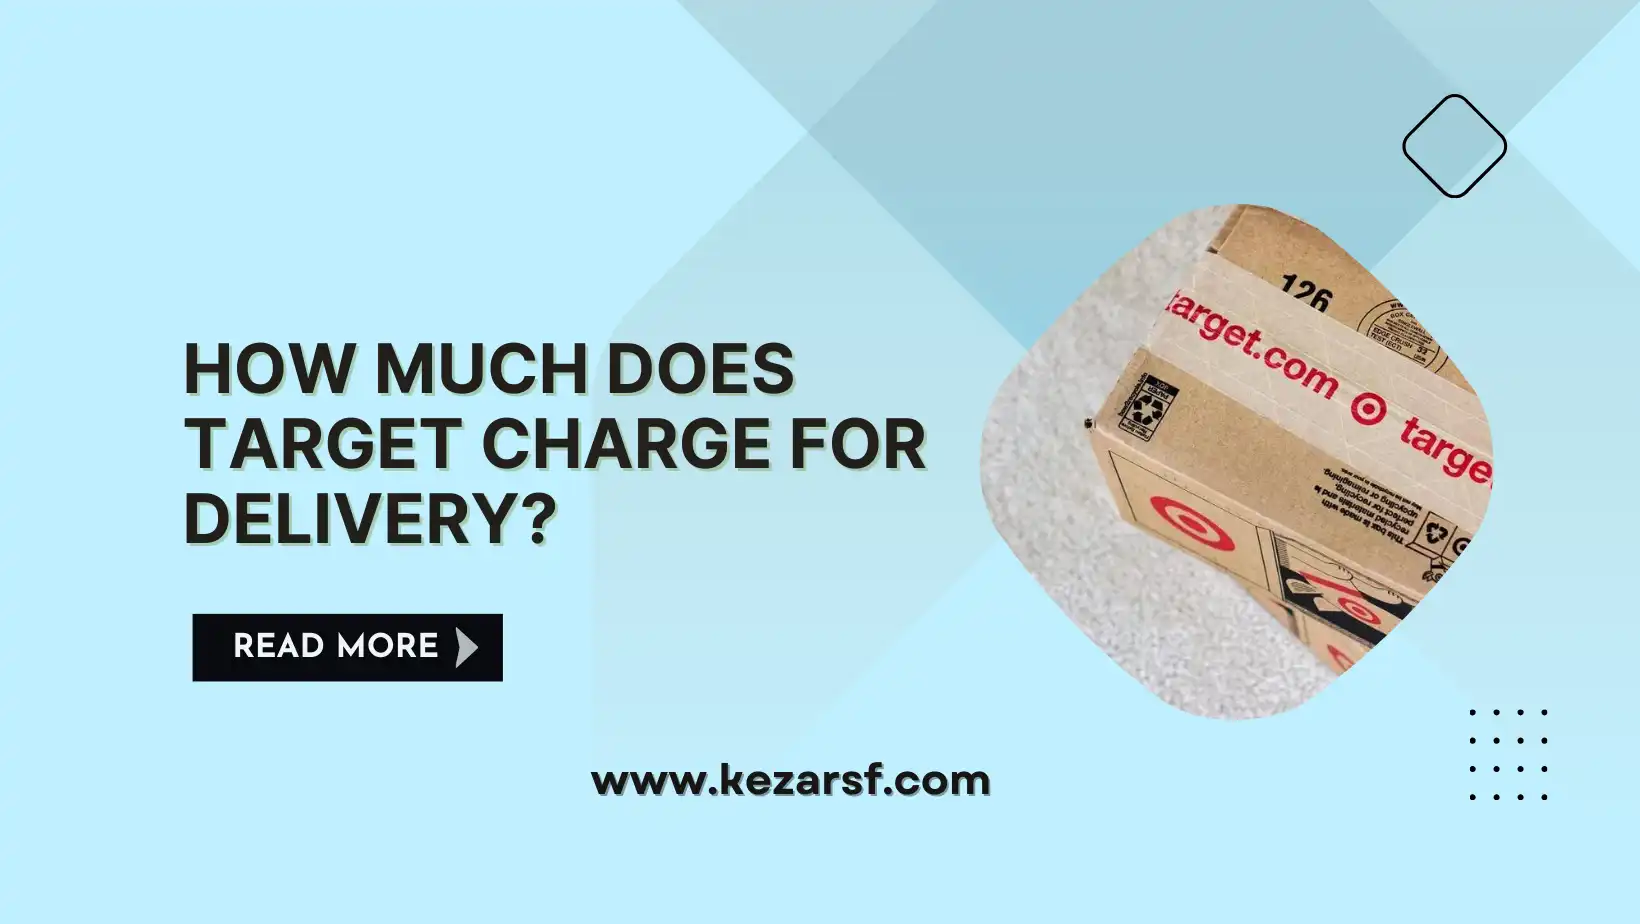 How Much Does Target Charge for Delivery?